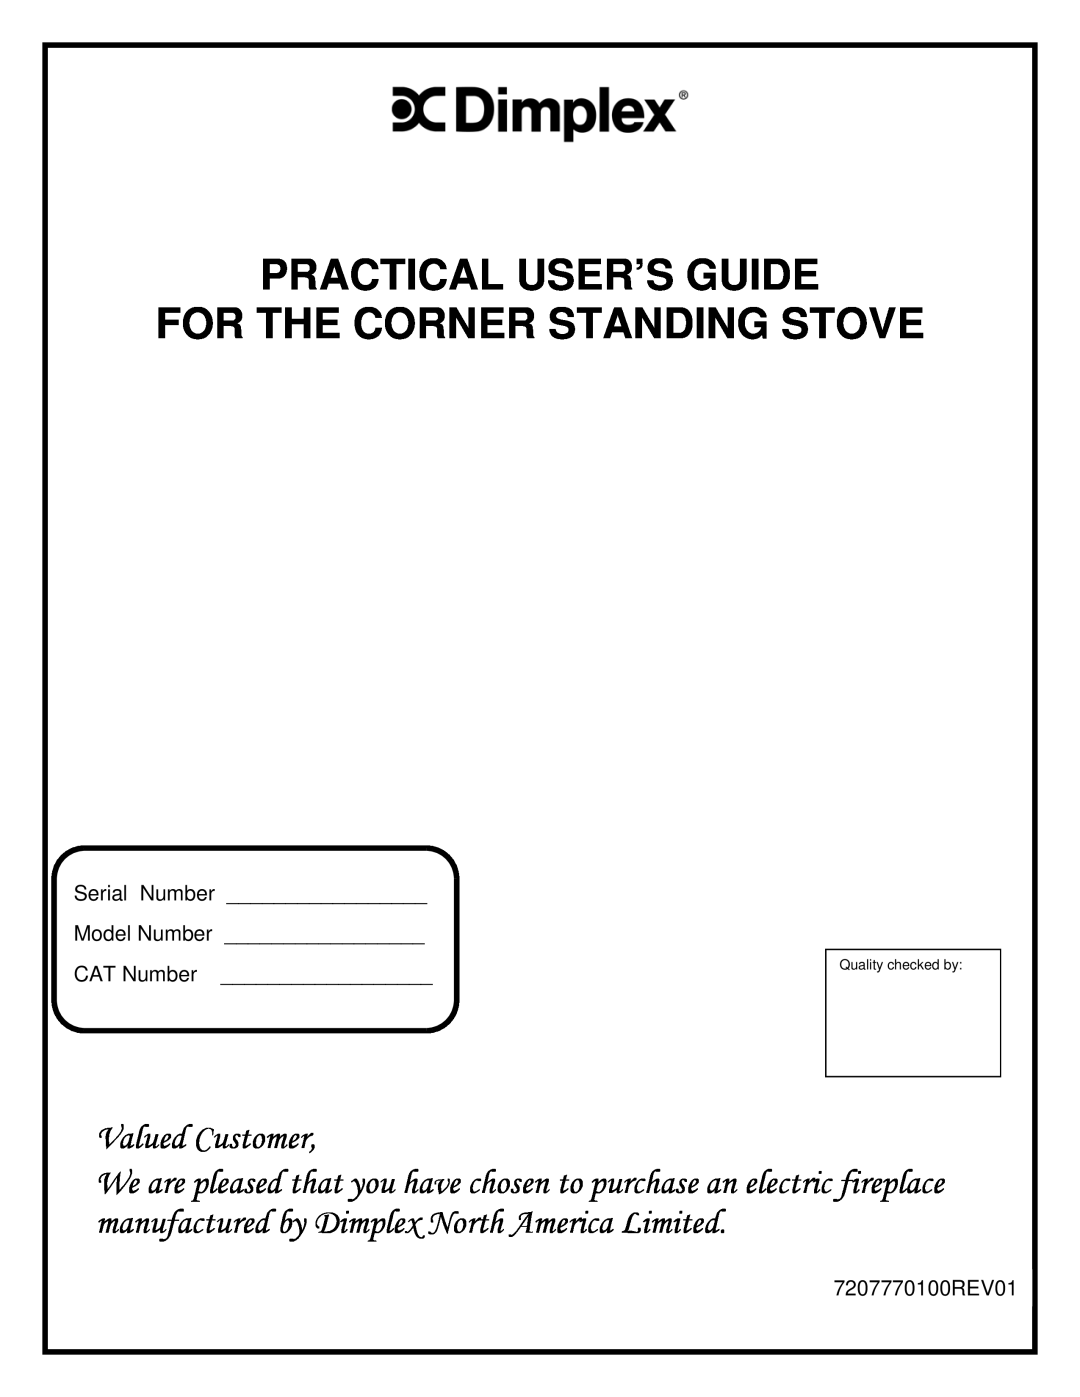 Dimplex manual Practical User’S Guide, For The Corner Standing Stove, Valued Customer, Quality checked by 